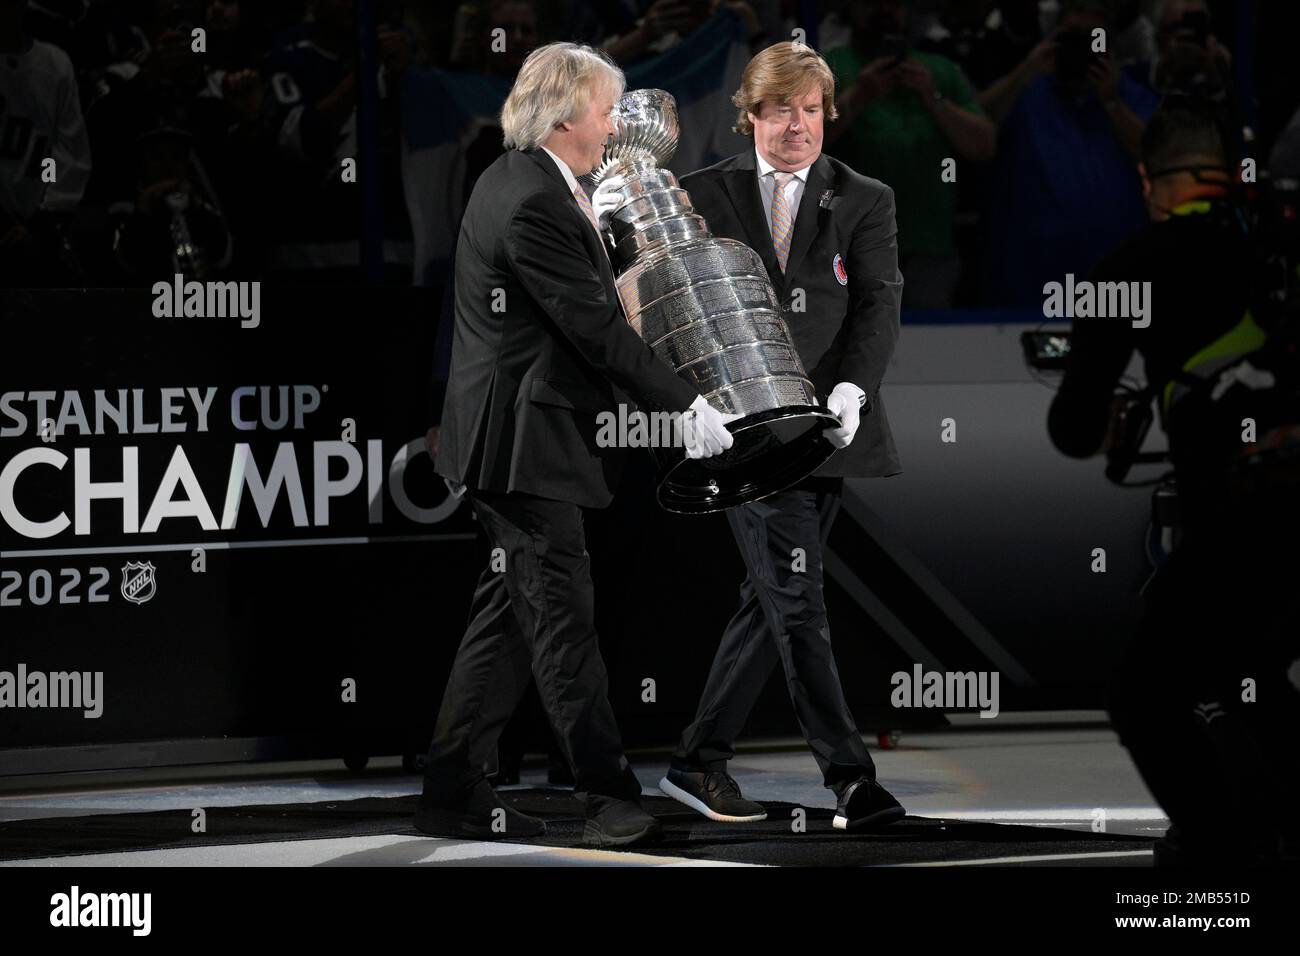 https://c8.alamy.com/comp/2MB551D/phil-pritchard-left-and-mike-bolt-known-as-the-keepers-of-the-cup-present-the-stanley-cup-after-the-colorado-avalanche-defeated-the-tampa-bay-lightning-during-game-6-of-the-nhl-hockey-stanley-cup-finals-on-sunday-june-26-2022-in-tampa-fla-ap-photophelan-m-ebenhack-2MB551D.jpg